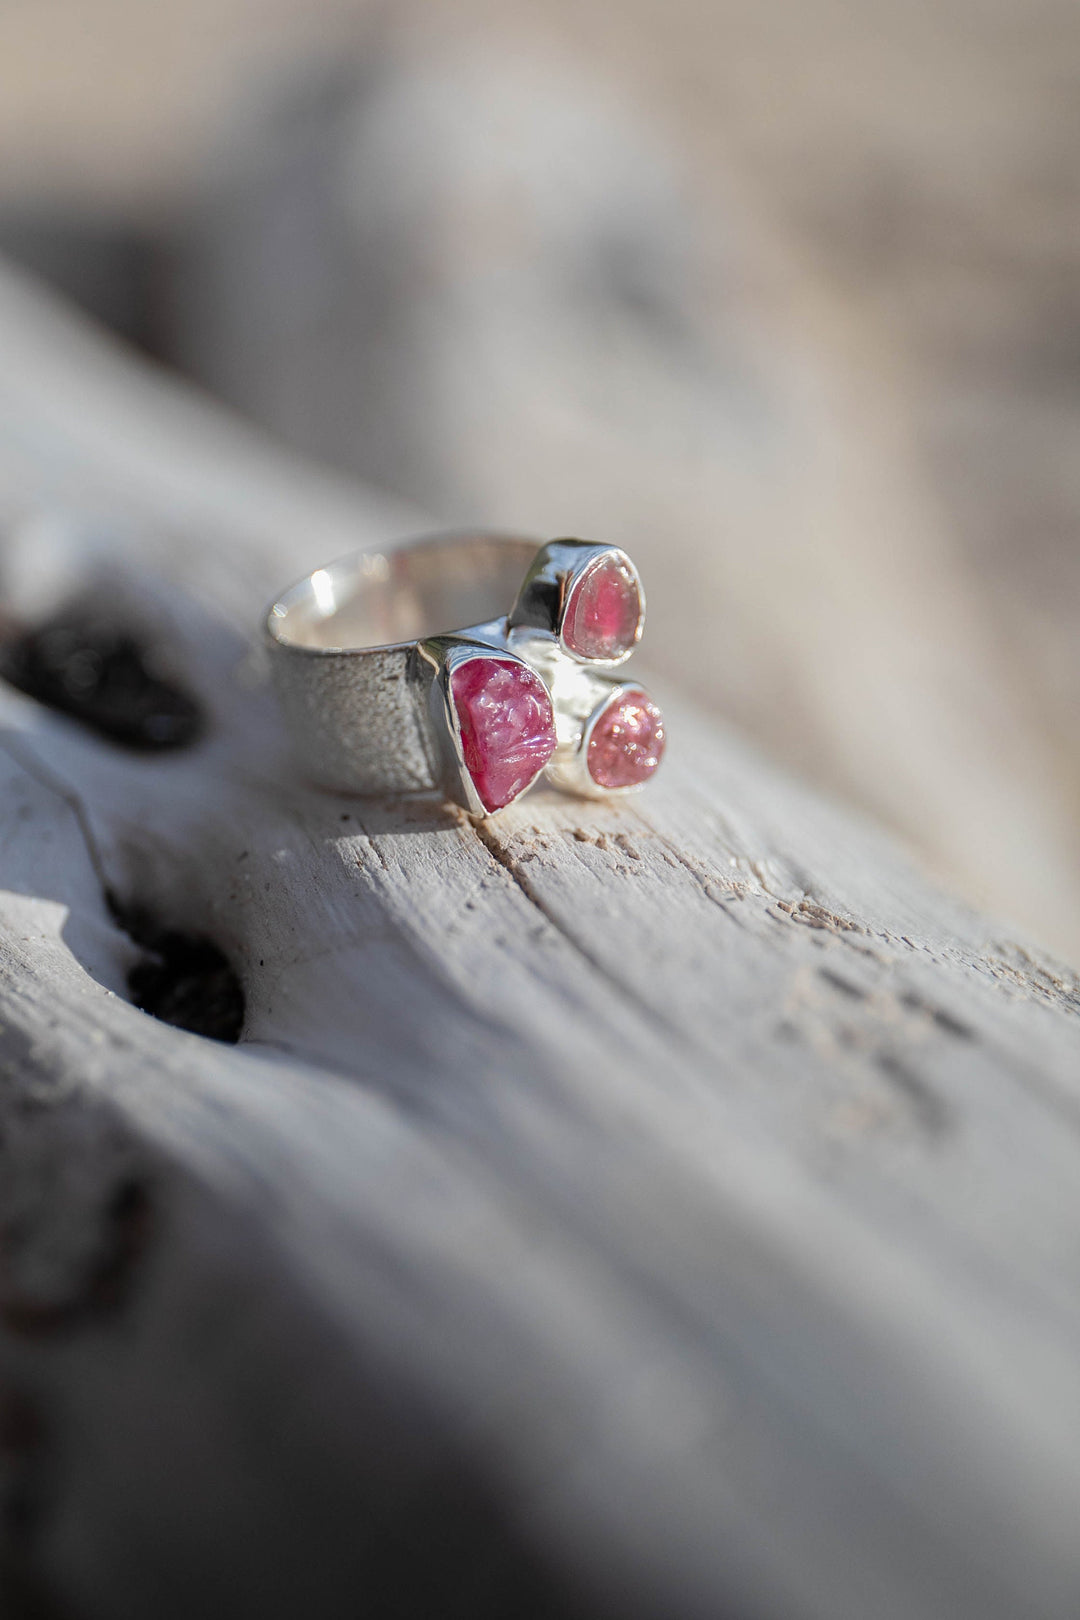 Multi Raw Ruby and Pink Tourmaline Ring set in Sterling Silver- Size 7.5 US